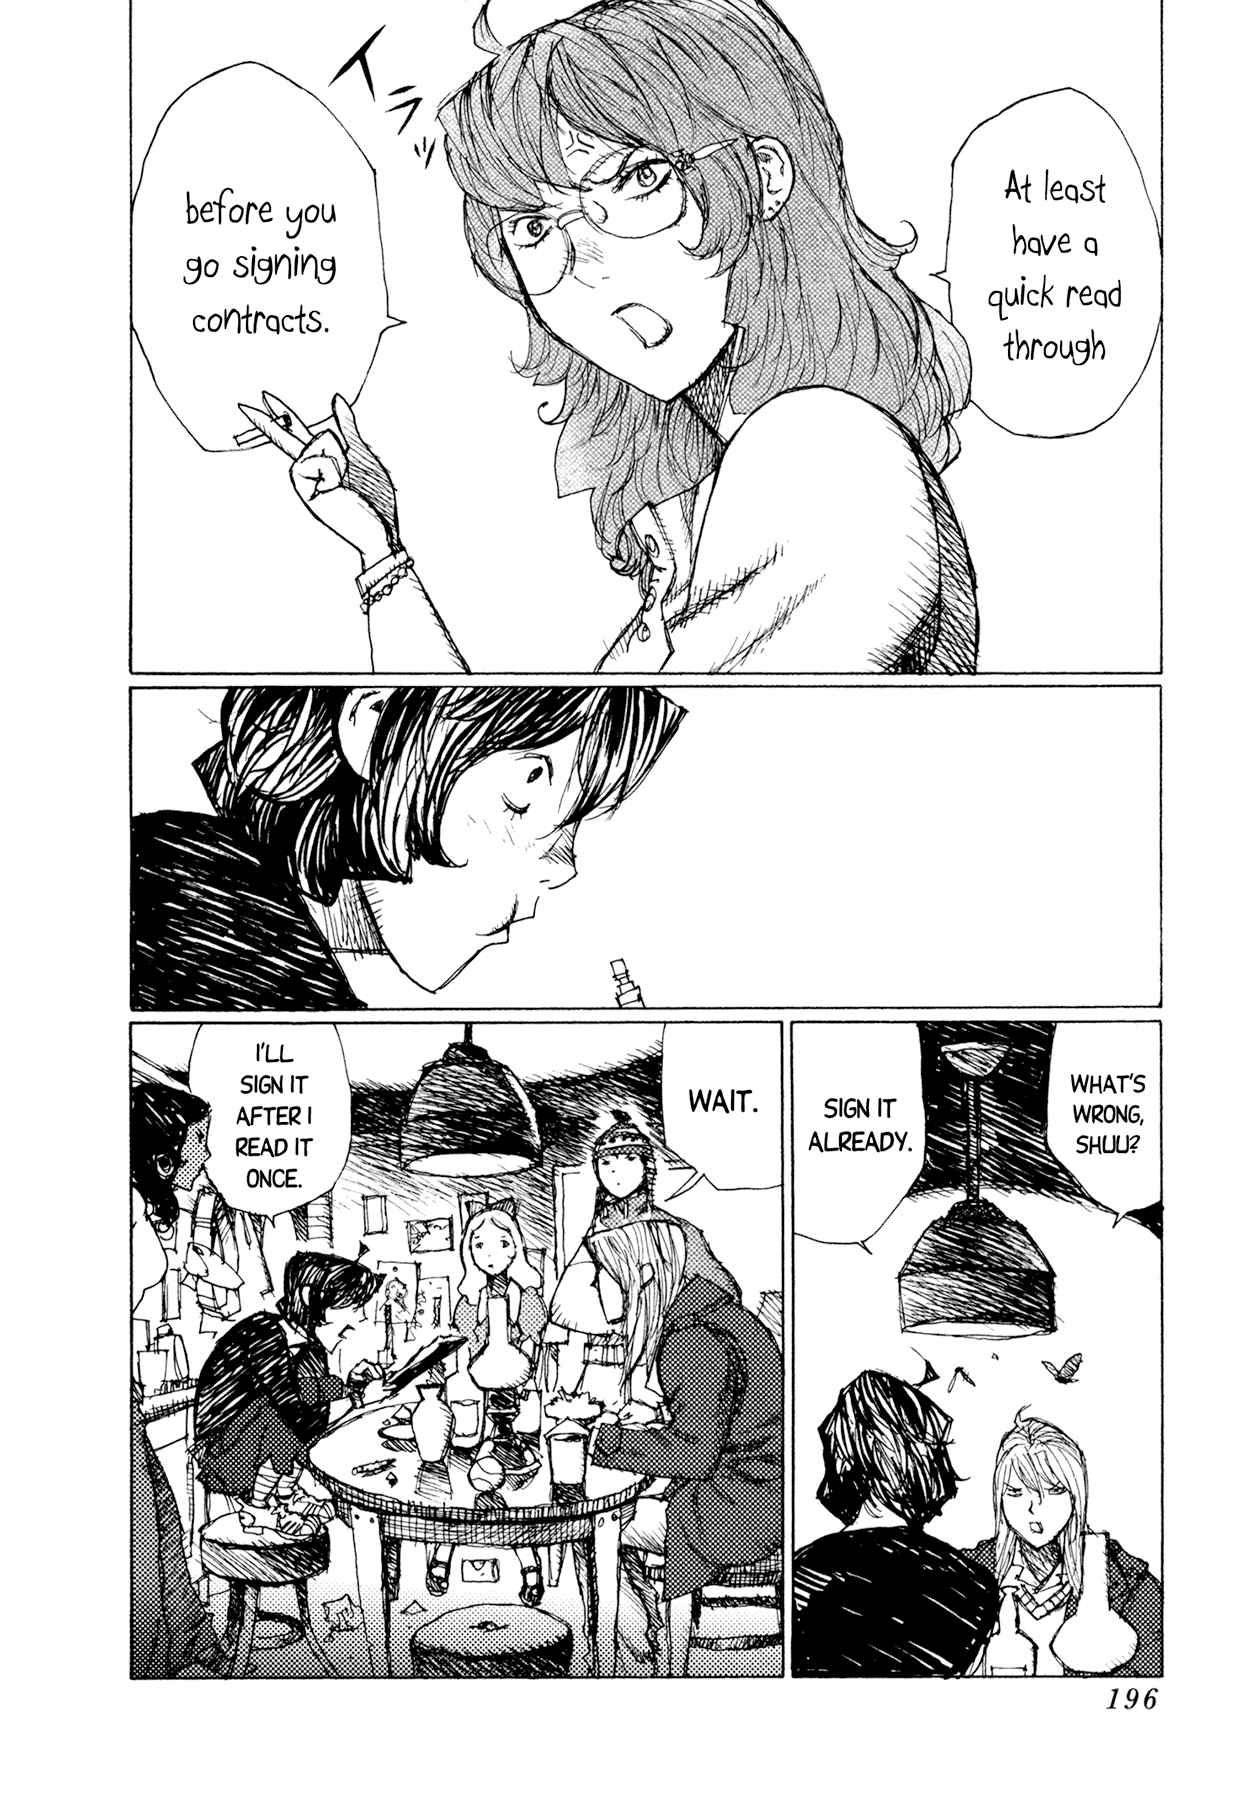 Alice in Hell Vol. 4 Ch. 29 Don't Go There